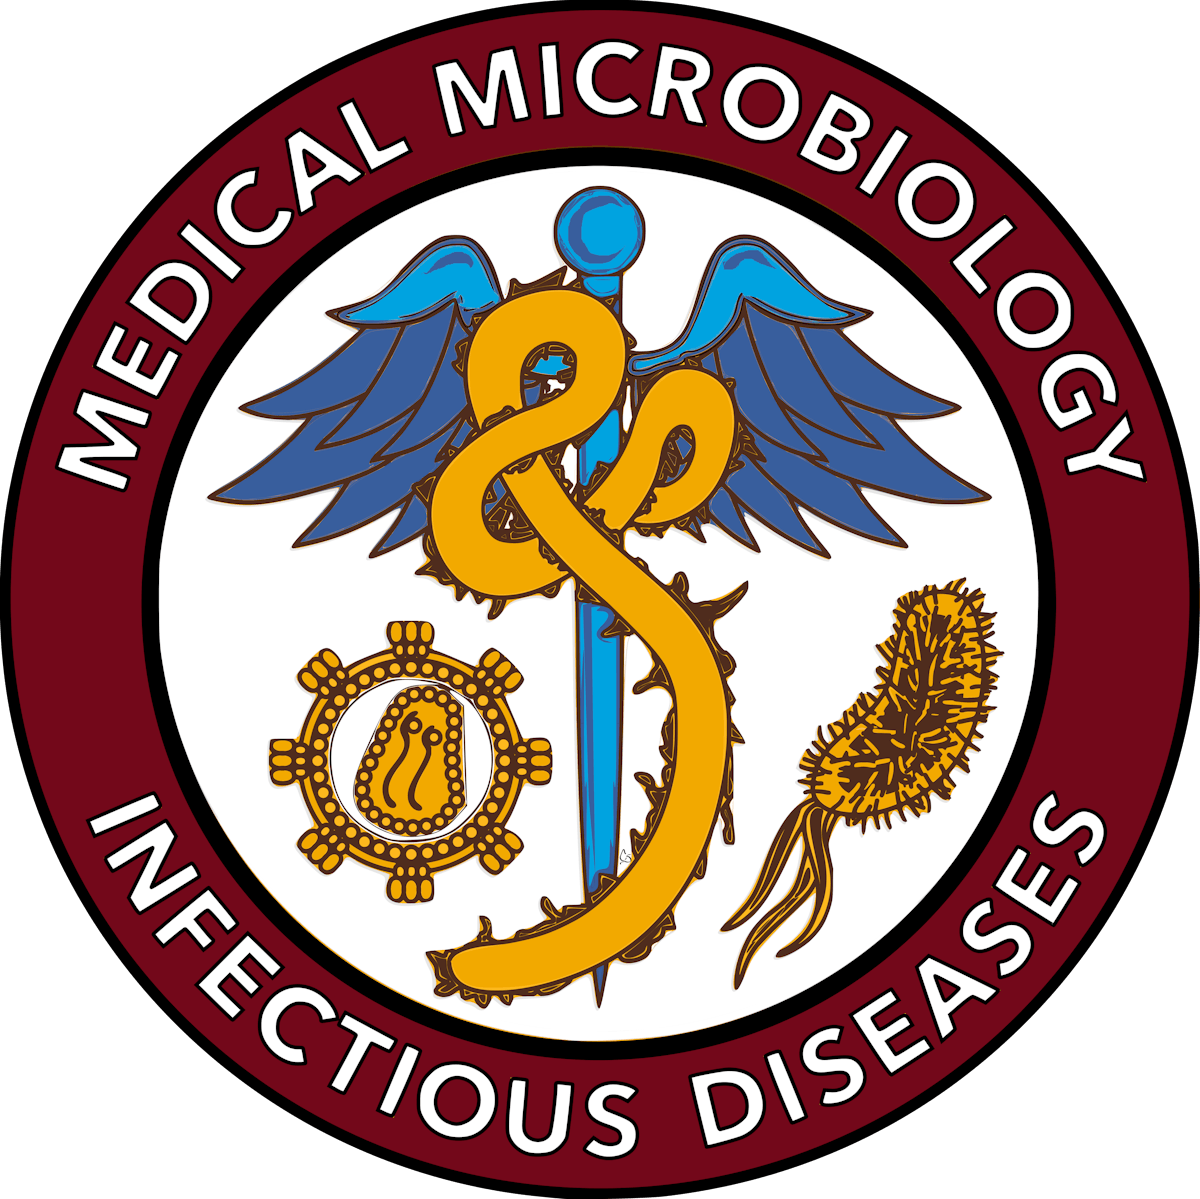 Department of Microbiology & Infectious Diseases